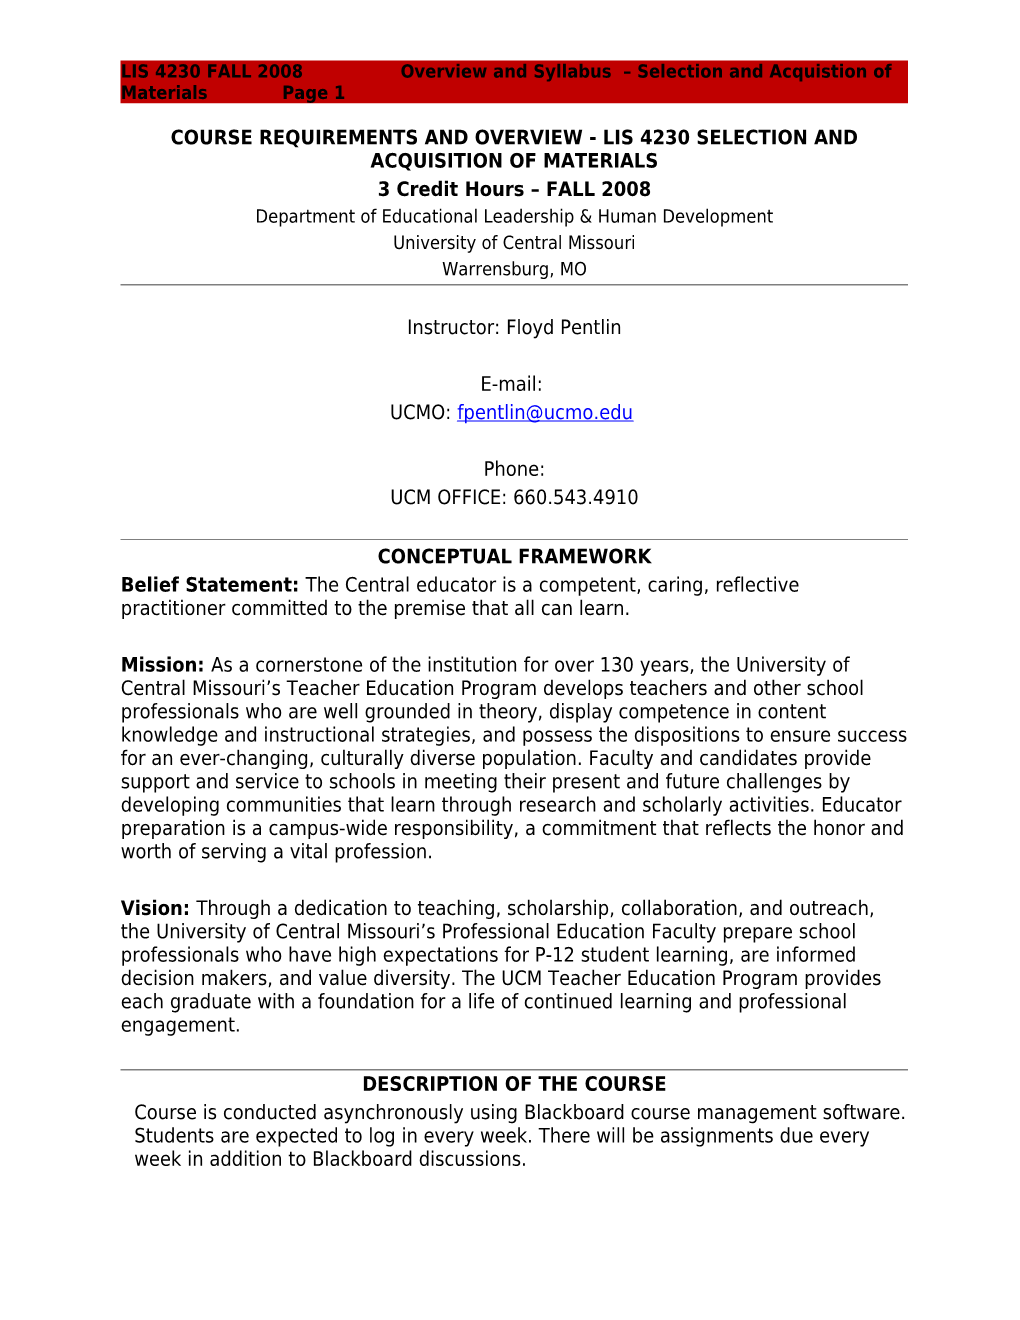 LIS 4230 FALL 2008 Overview and Syllabus Selection and Acquistion of Materials Page 4